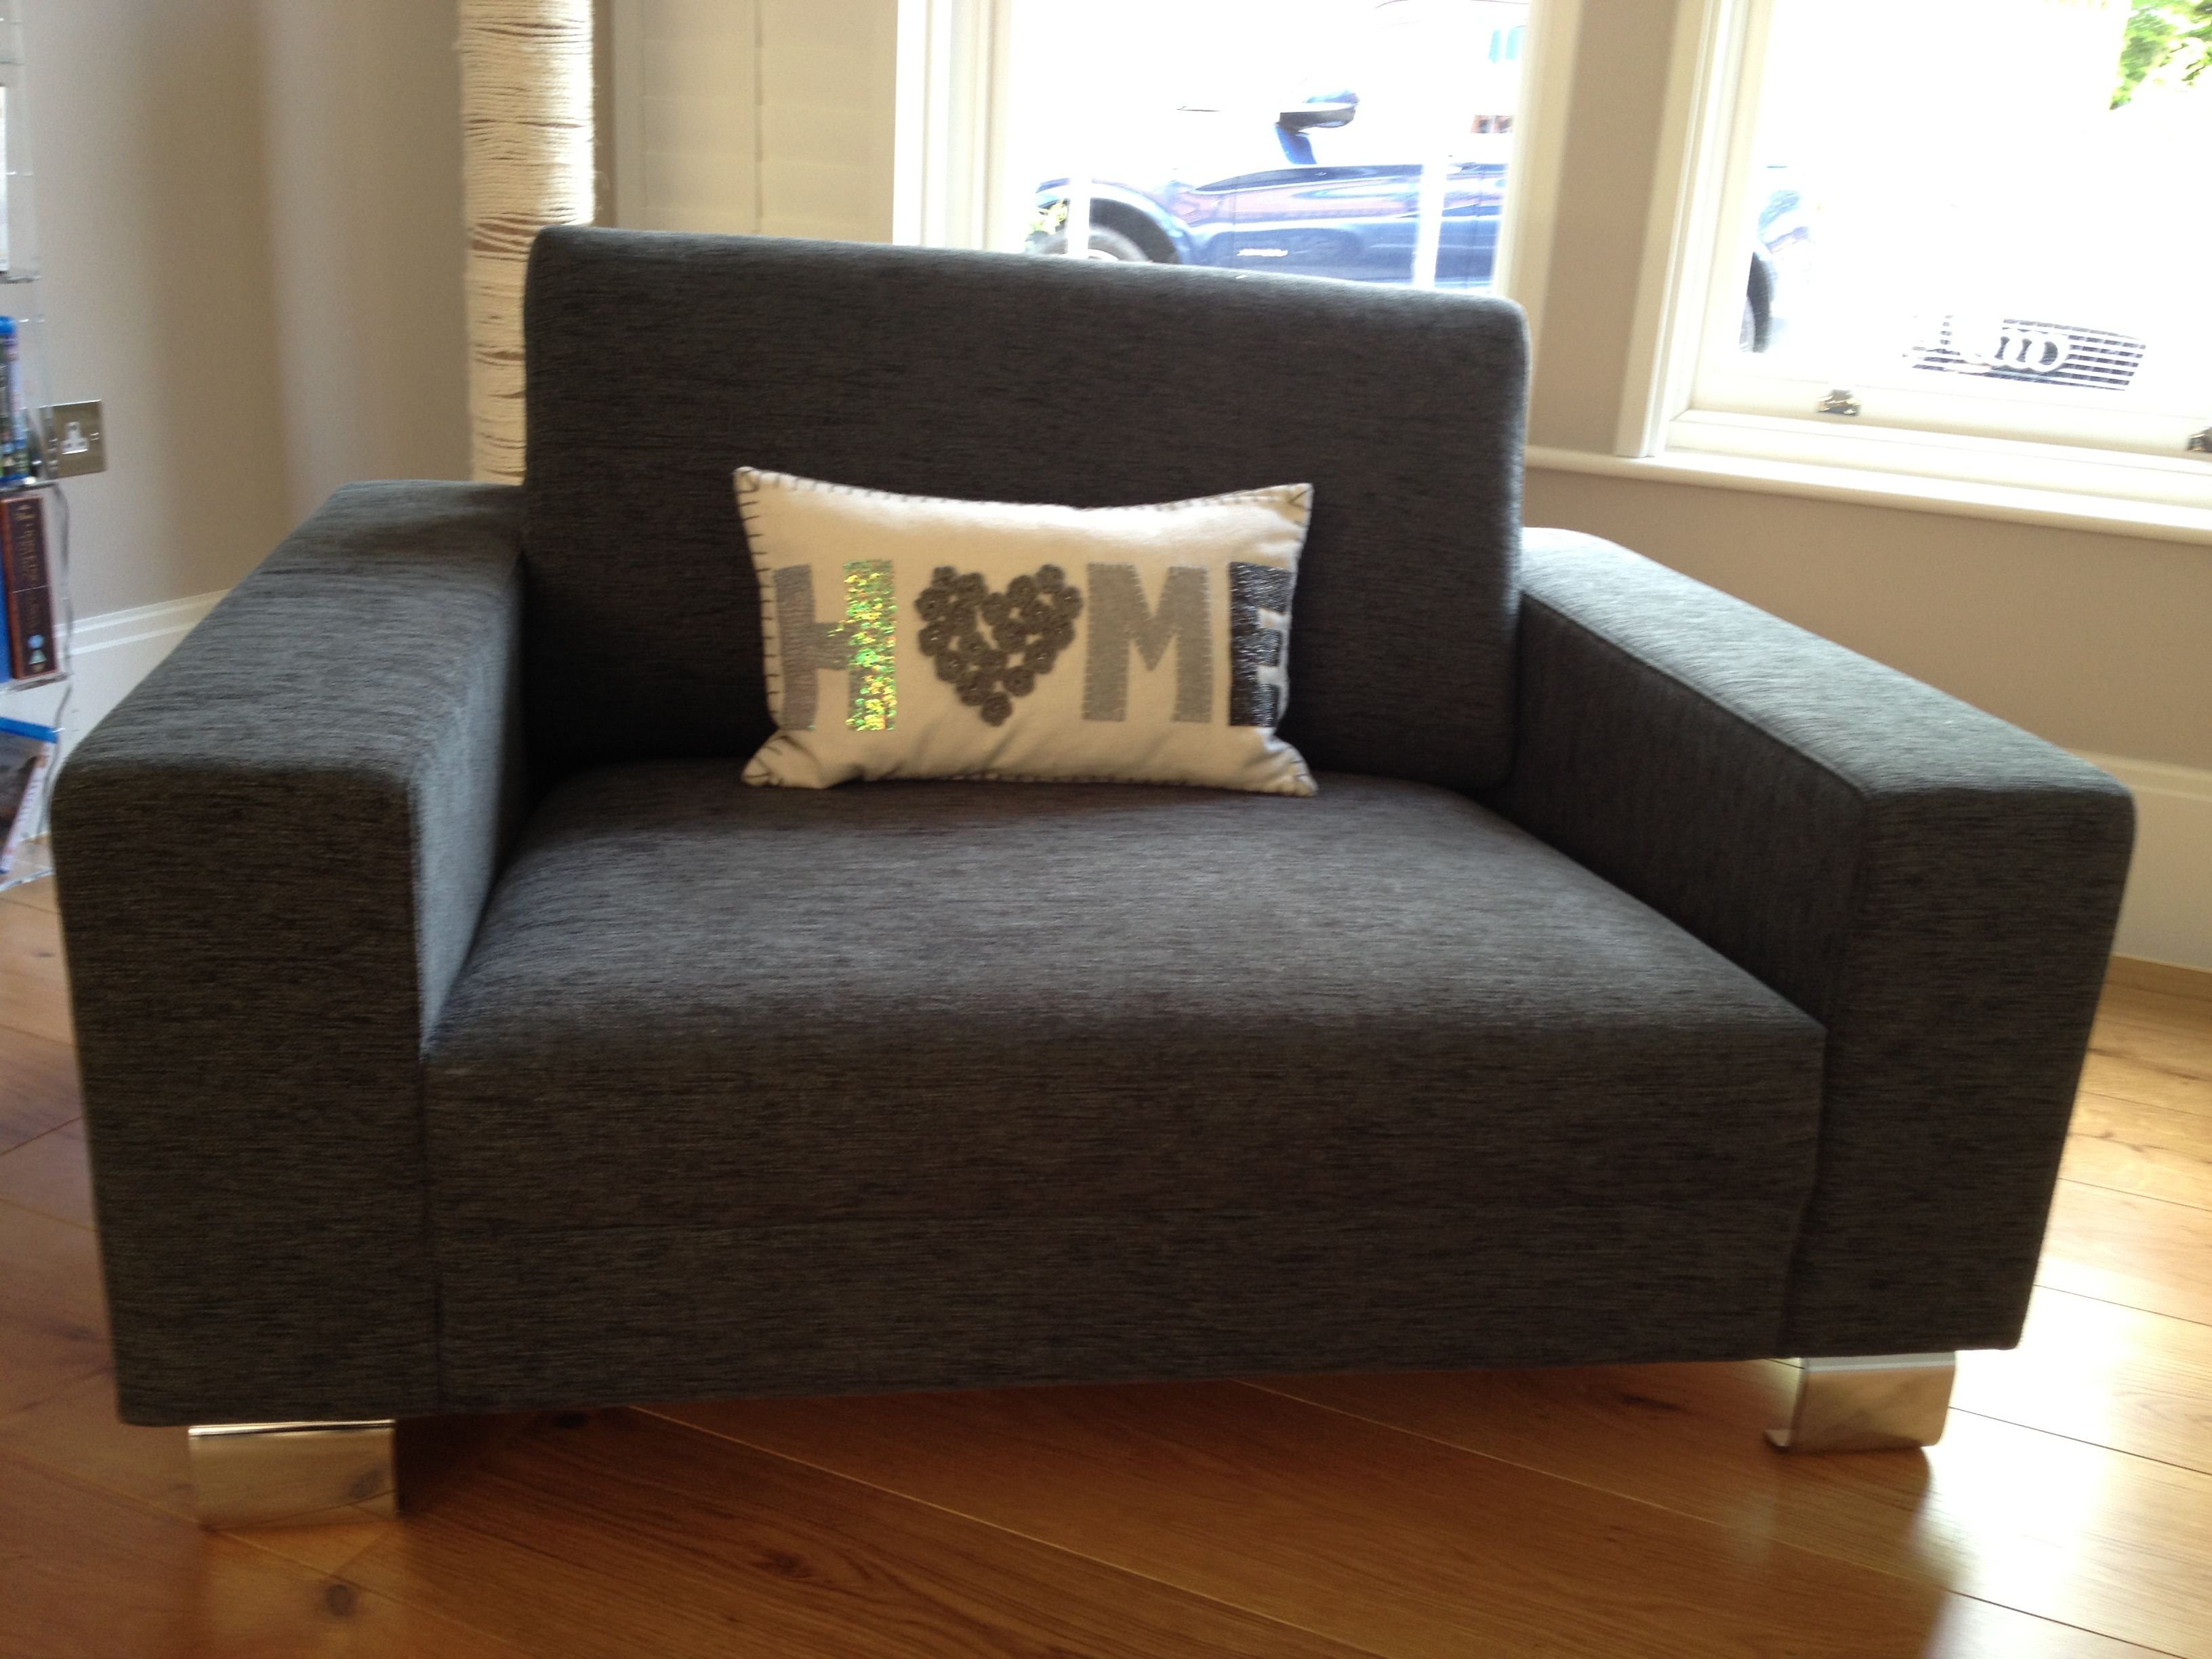 130 Cm Wide Arm Chair Consisting Of 90 Cm Seat Big Enough For Two Within Sofa Arm Chairs (View 12 of 15)